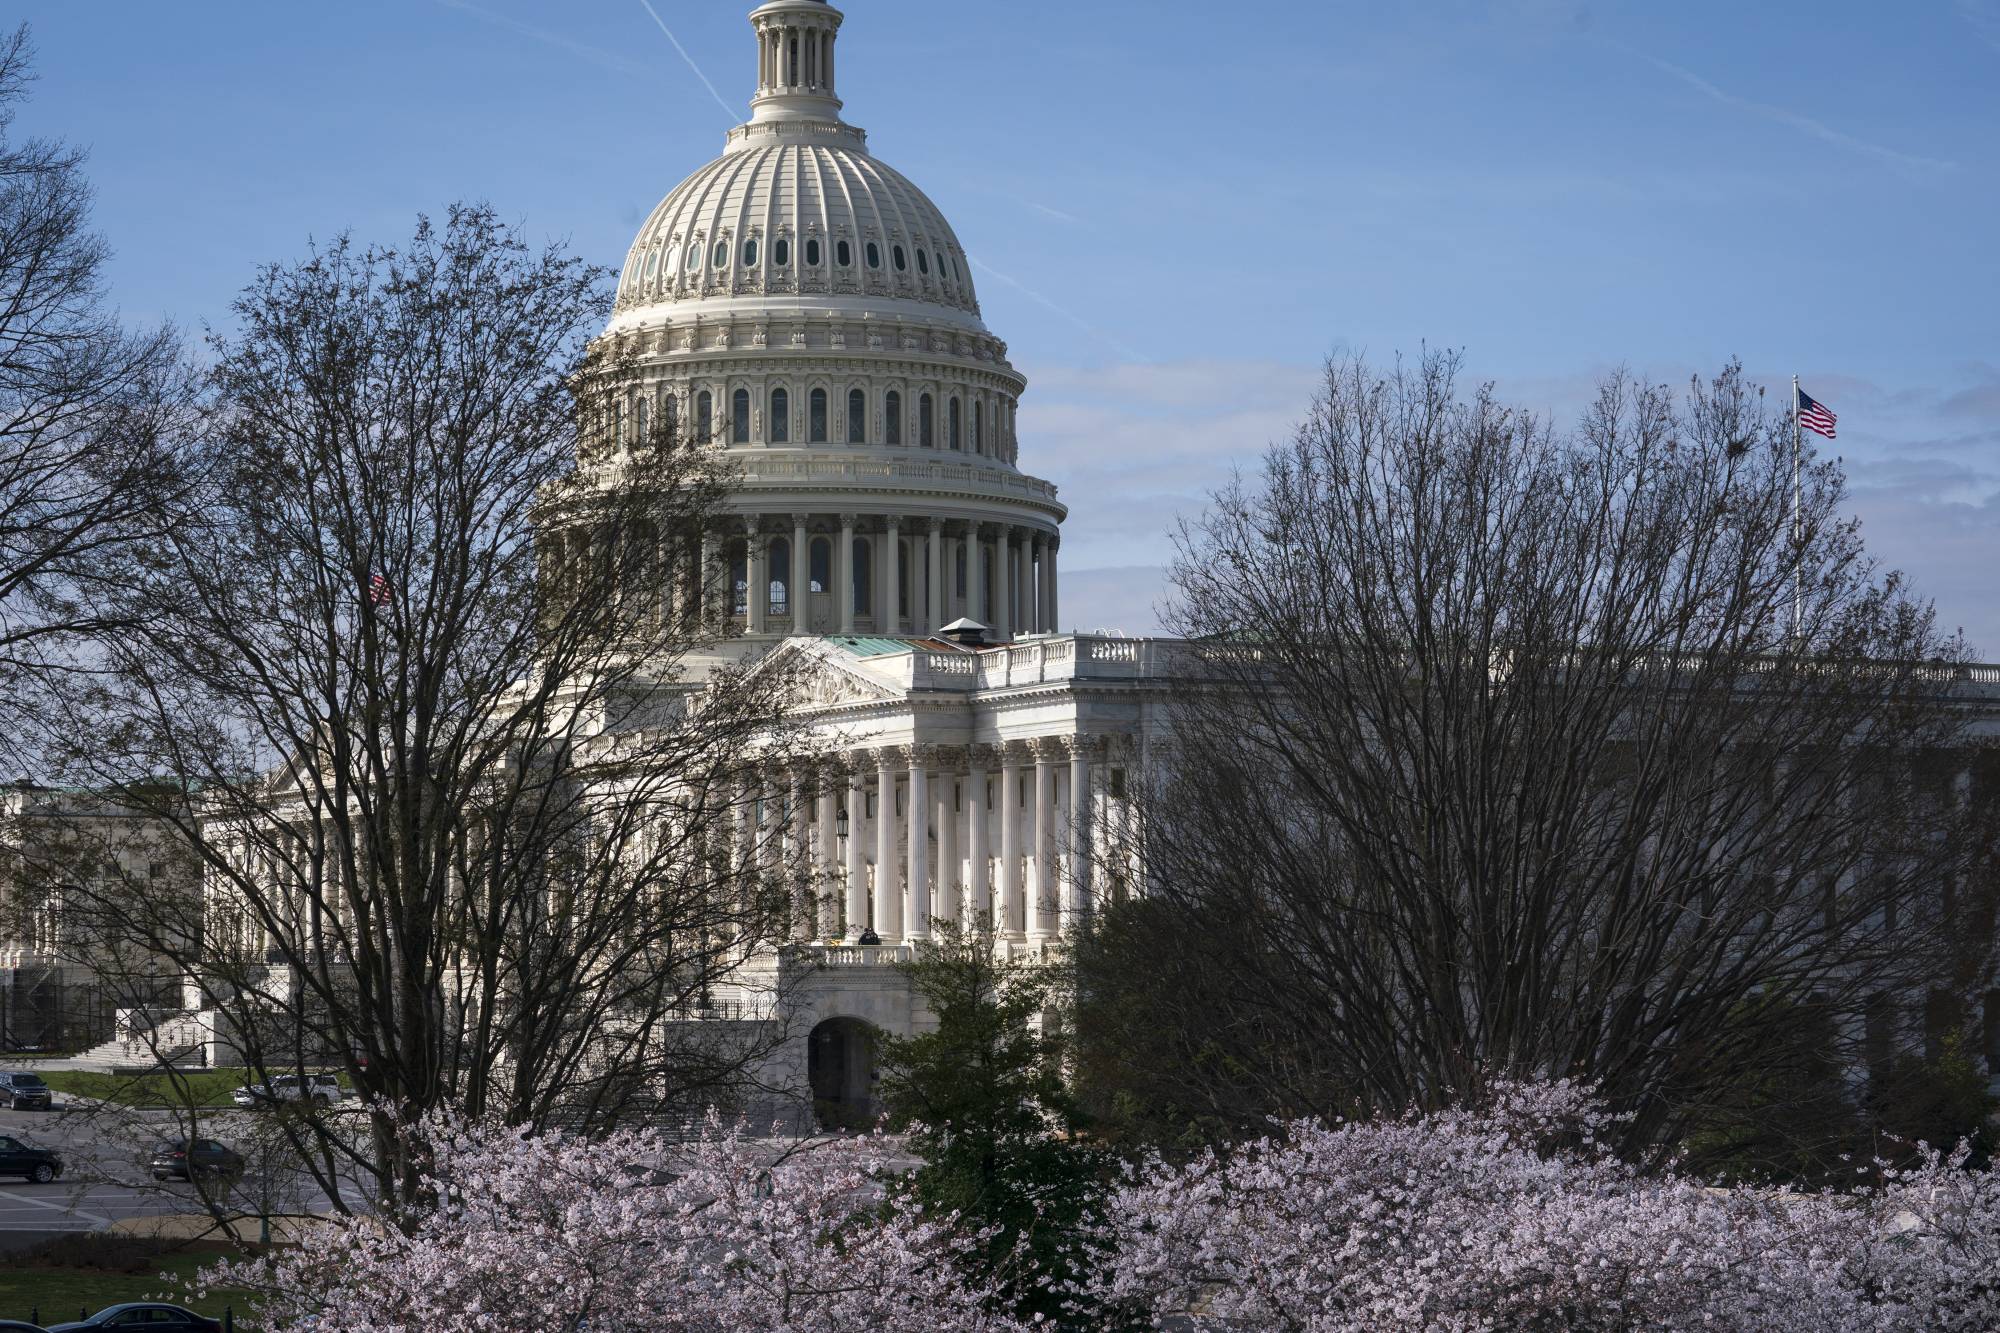 The Capitol is seen as lawmakers negotiate on the emergency coronavirus response legislation, at the Capitol in Washington, Wednesday, March 18, 2020. (AP Photo/J. Scott Applewhite)